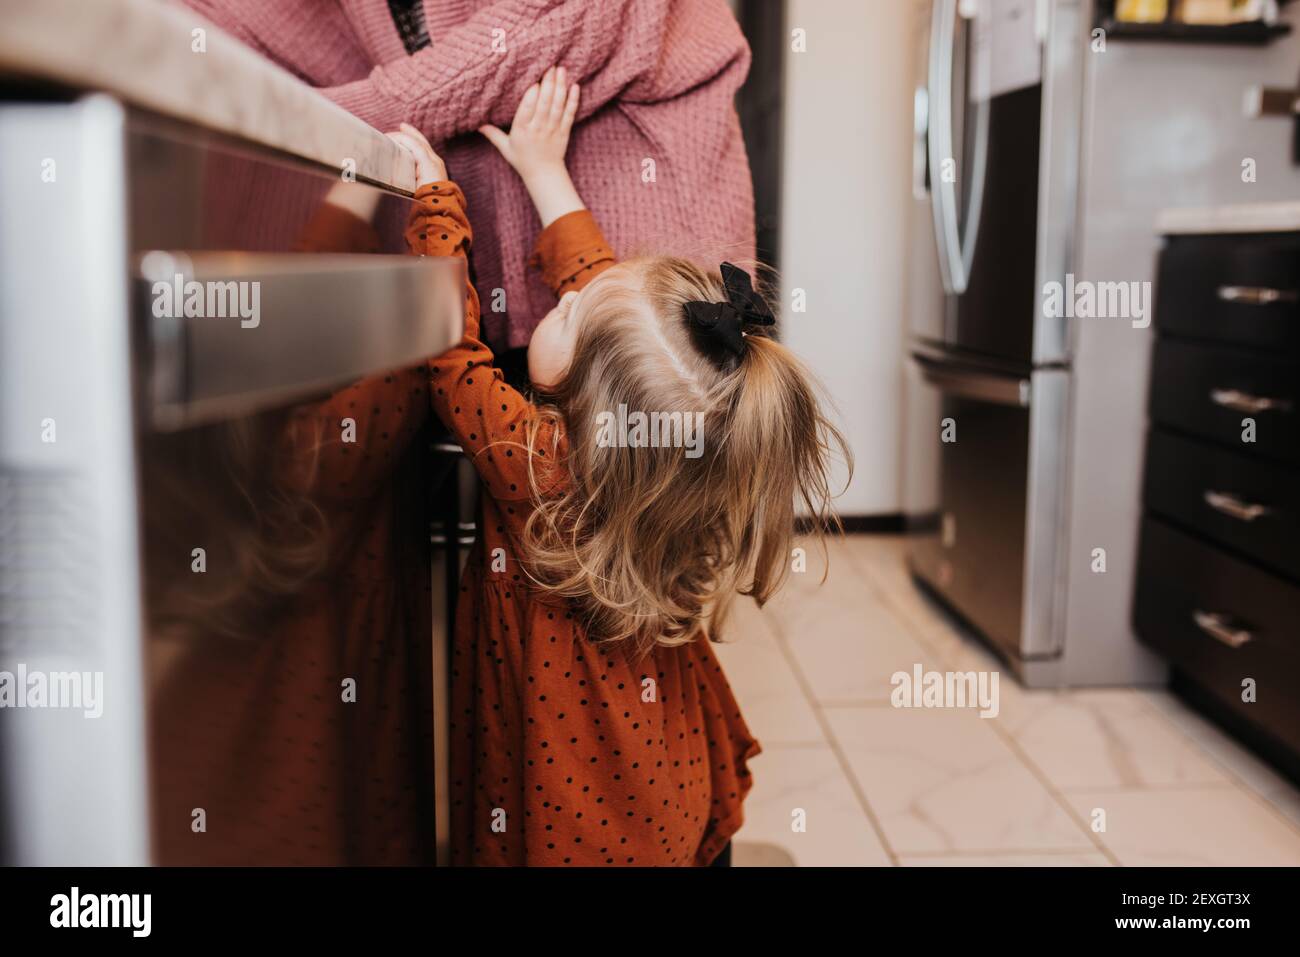 Toddler girl reaches for her mom in the family kitchen Stock Photo